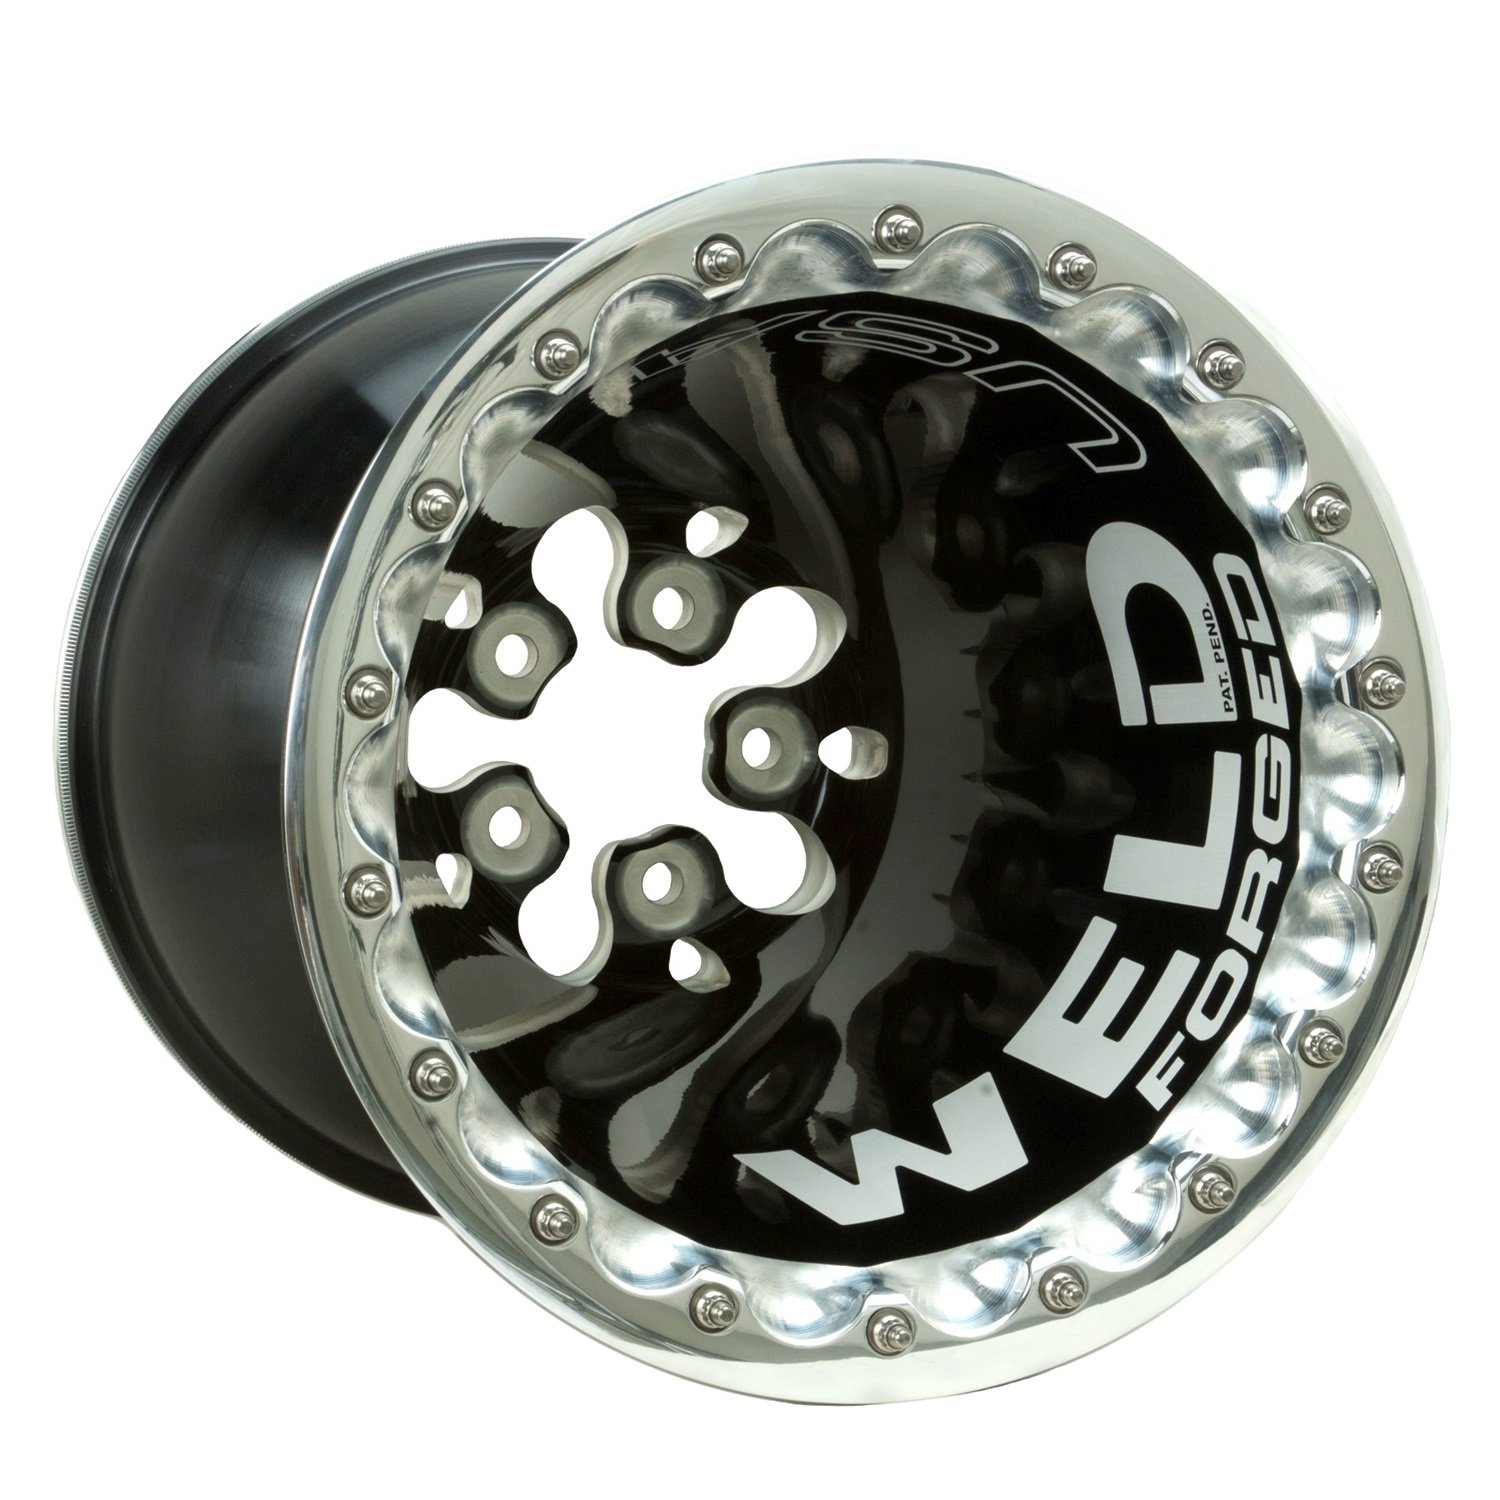 Delta-1 Forged Top Fuel Wheels 5 Lug 4" RS